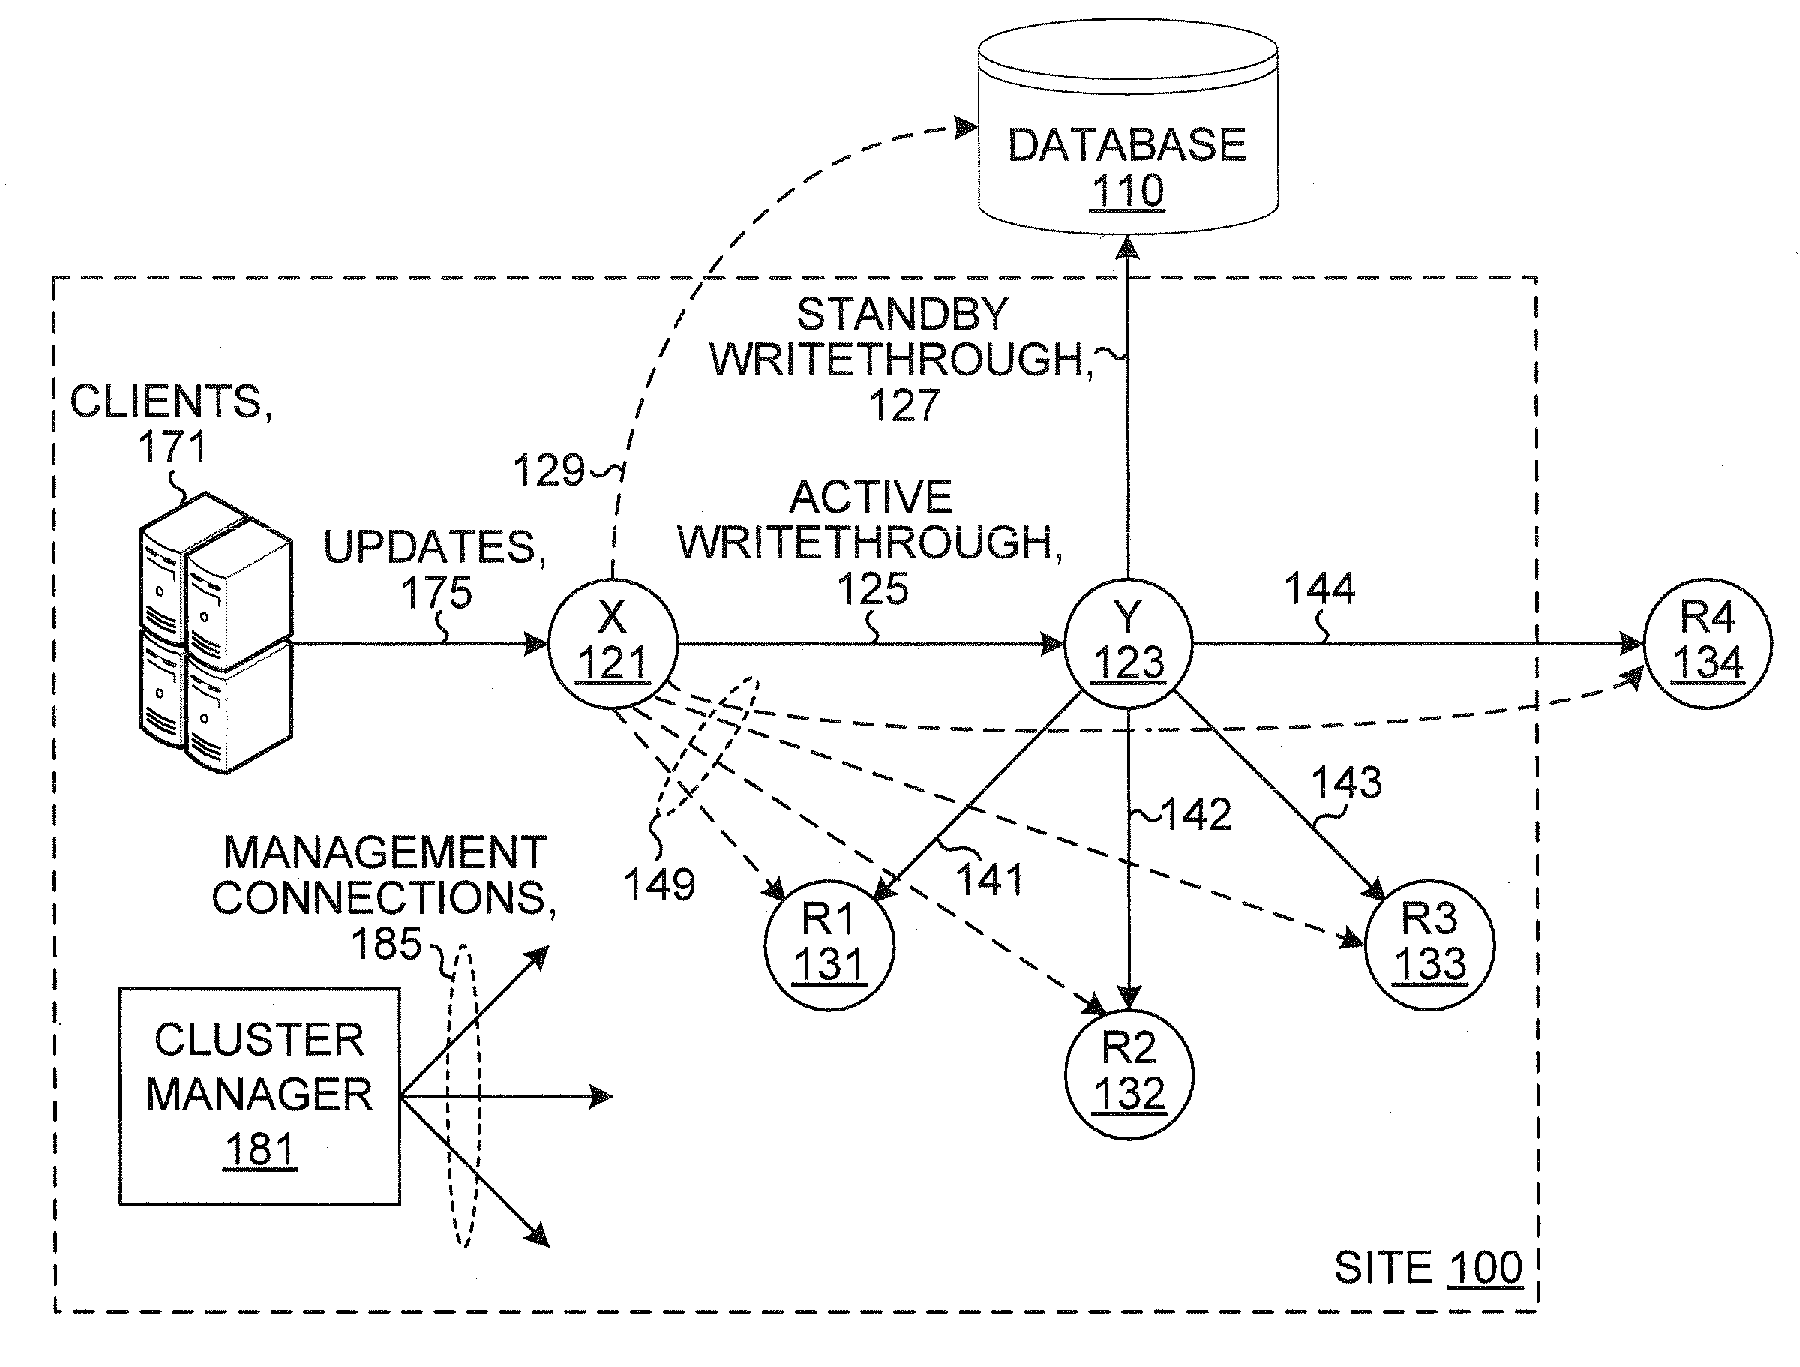 Database system with active standby and nodes